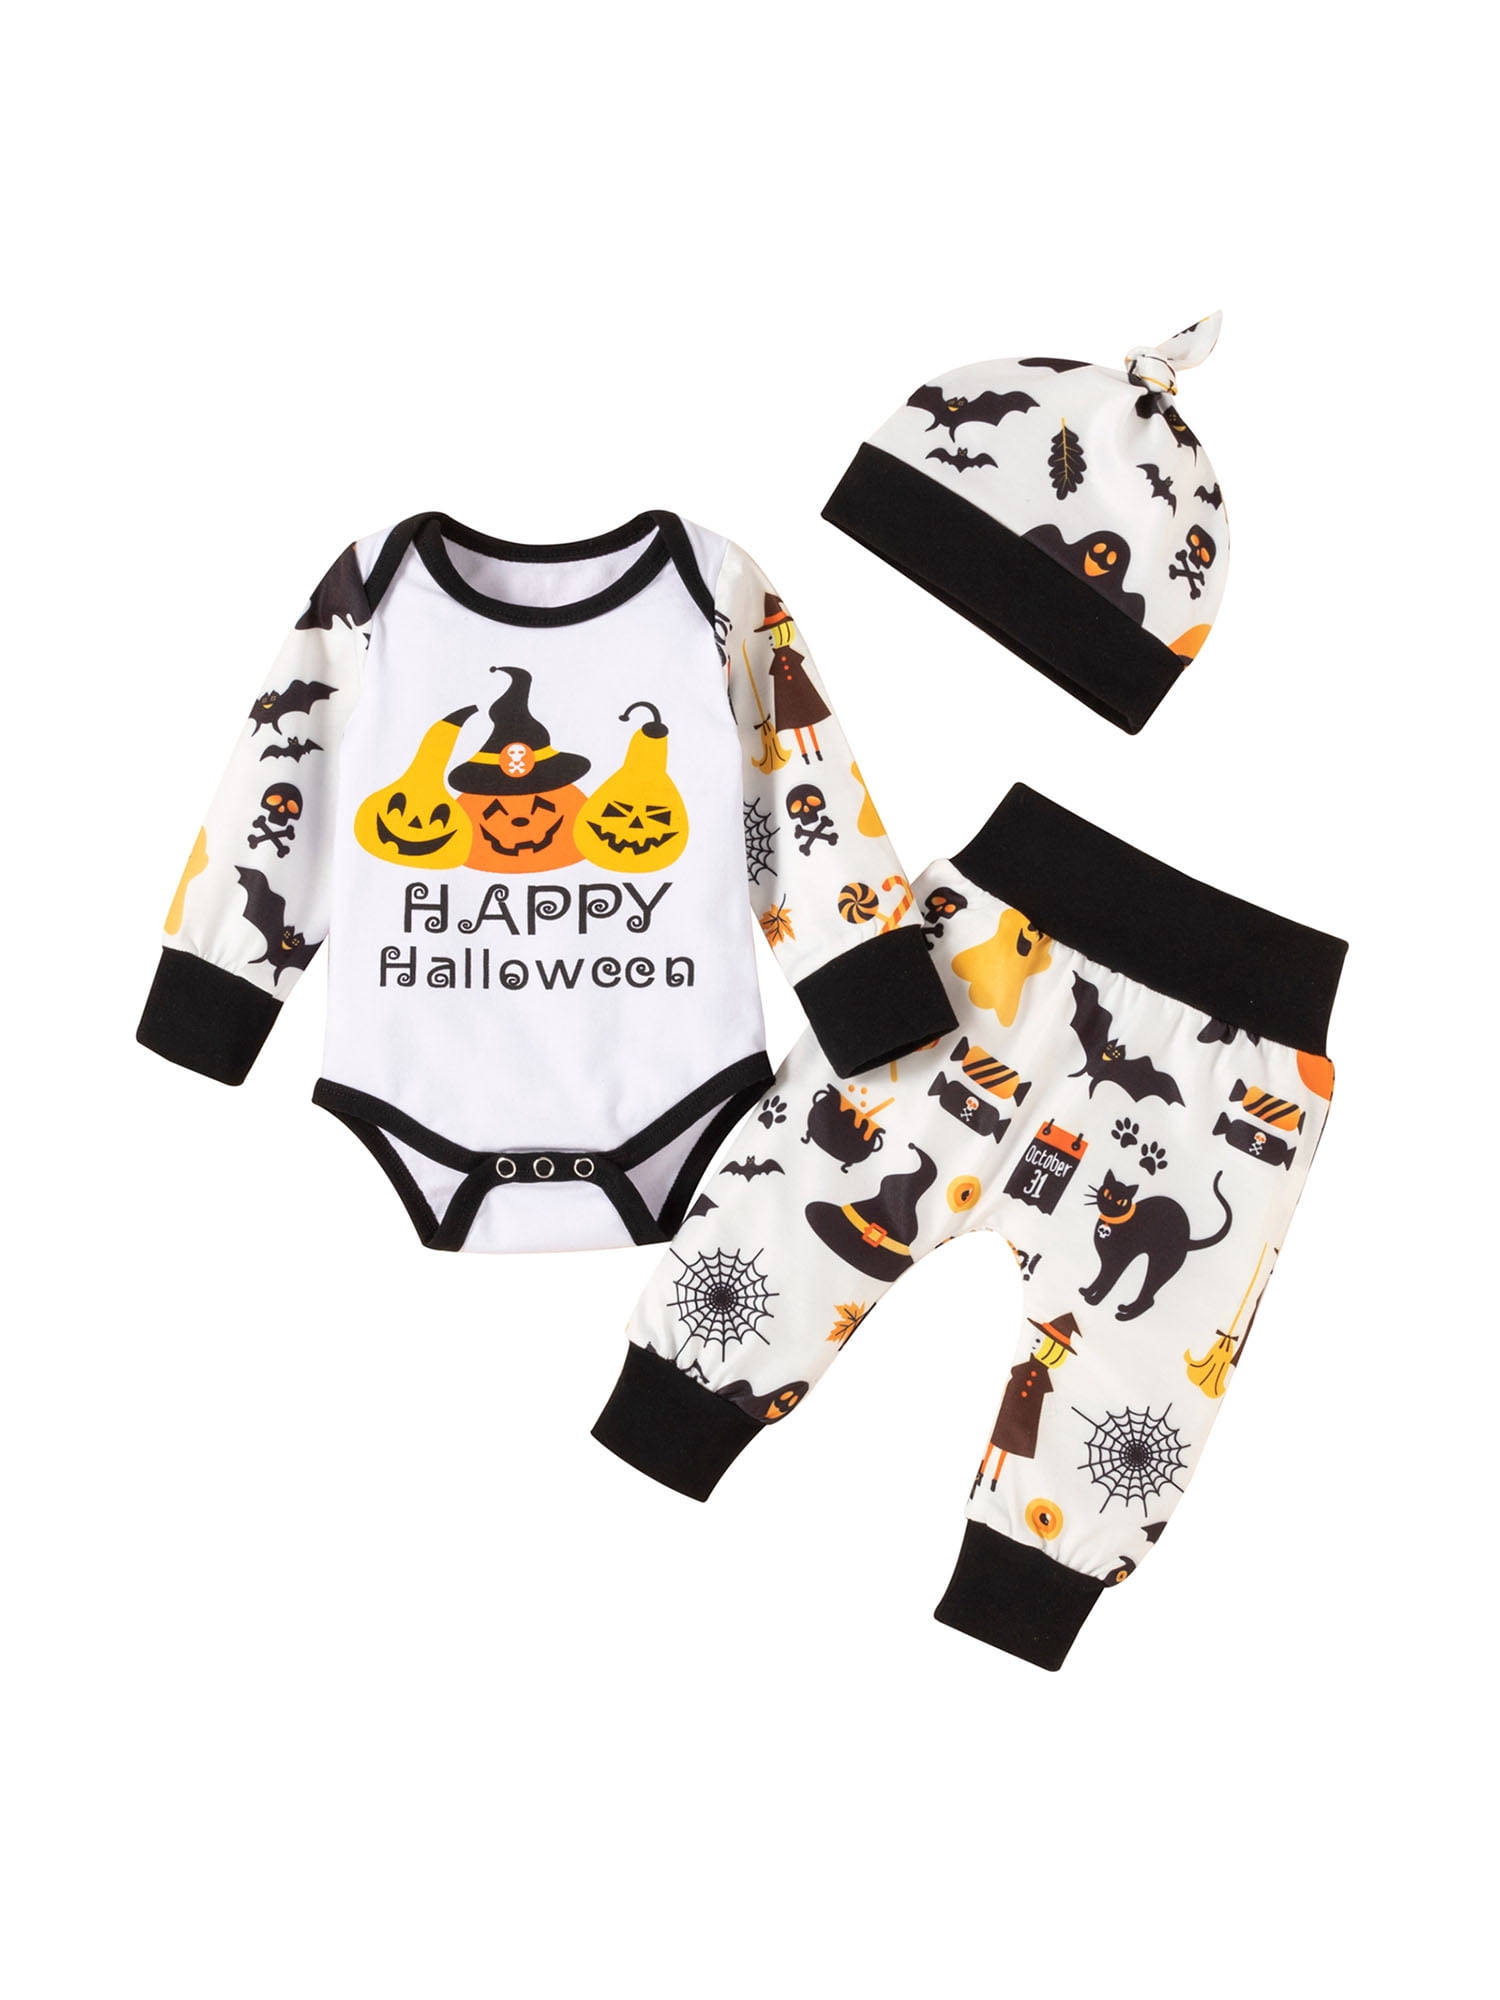 Newborn Infant Baby Girls Boys Halloween Ghost Printed Rompers Outfits Clothes 